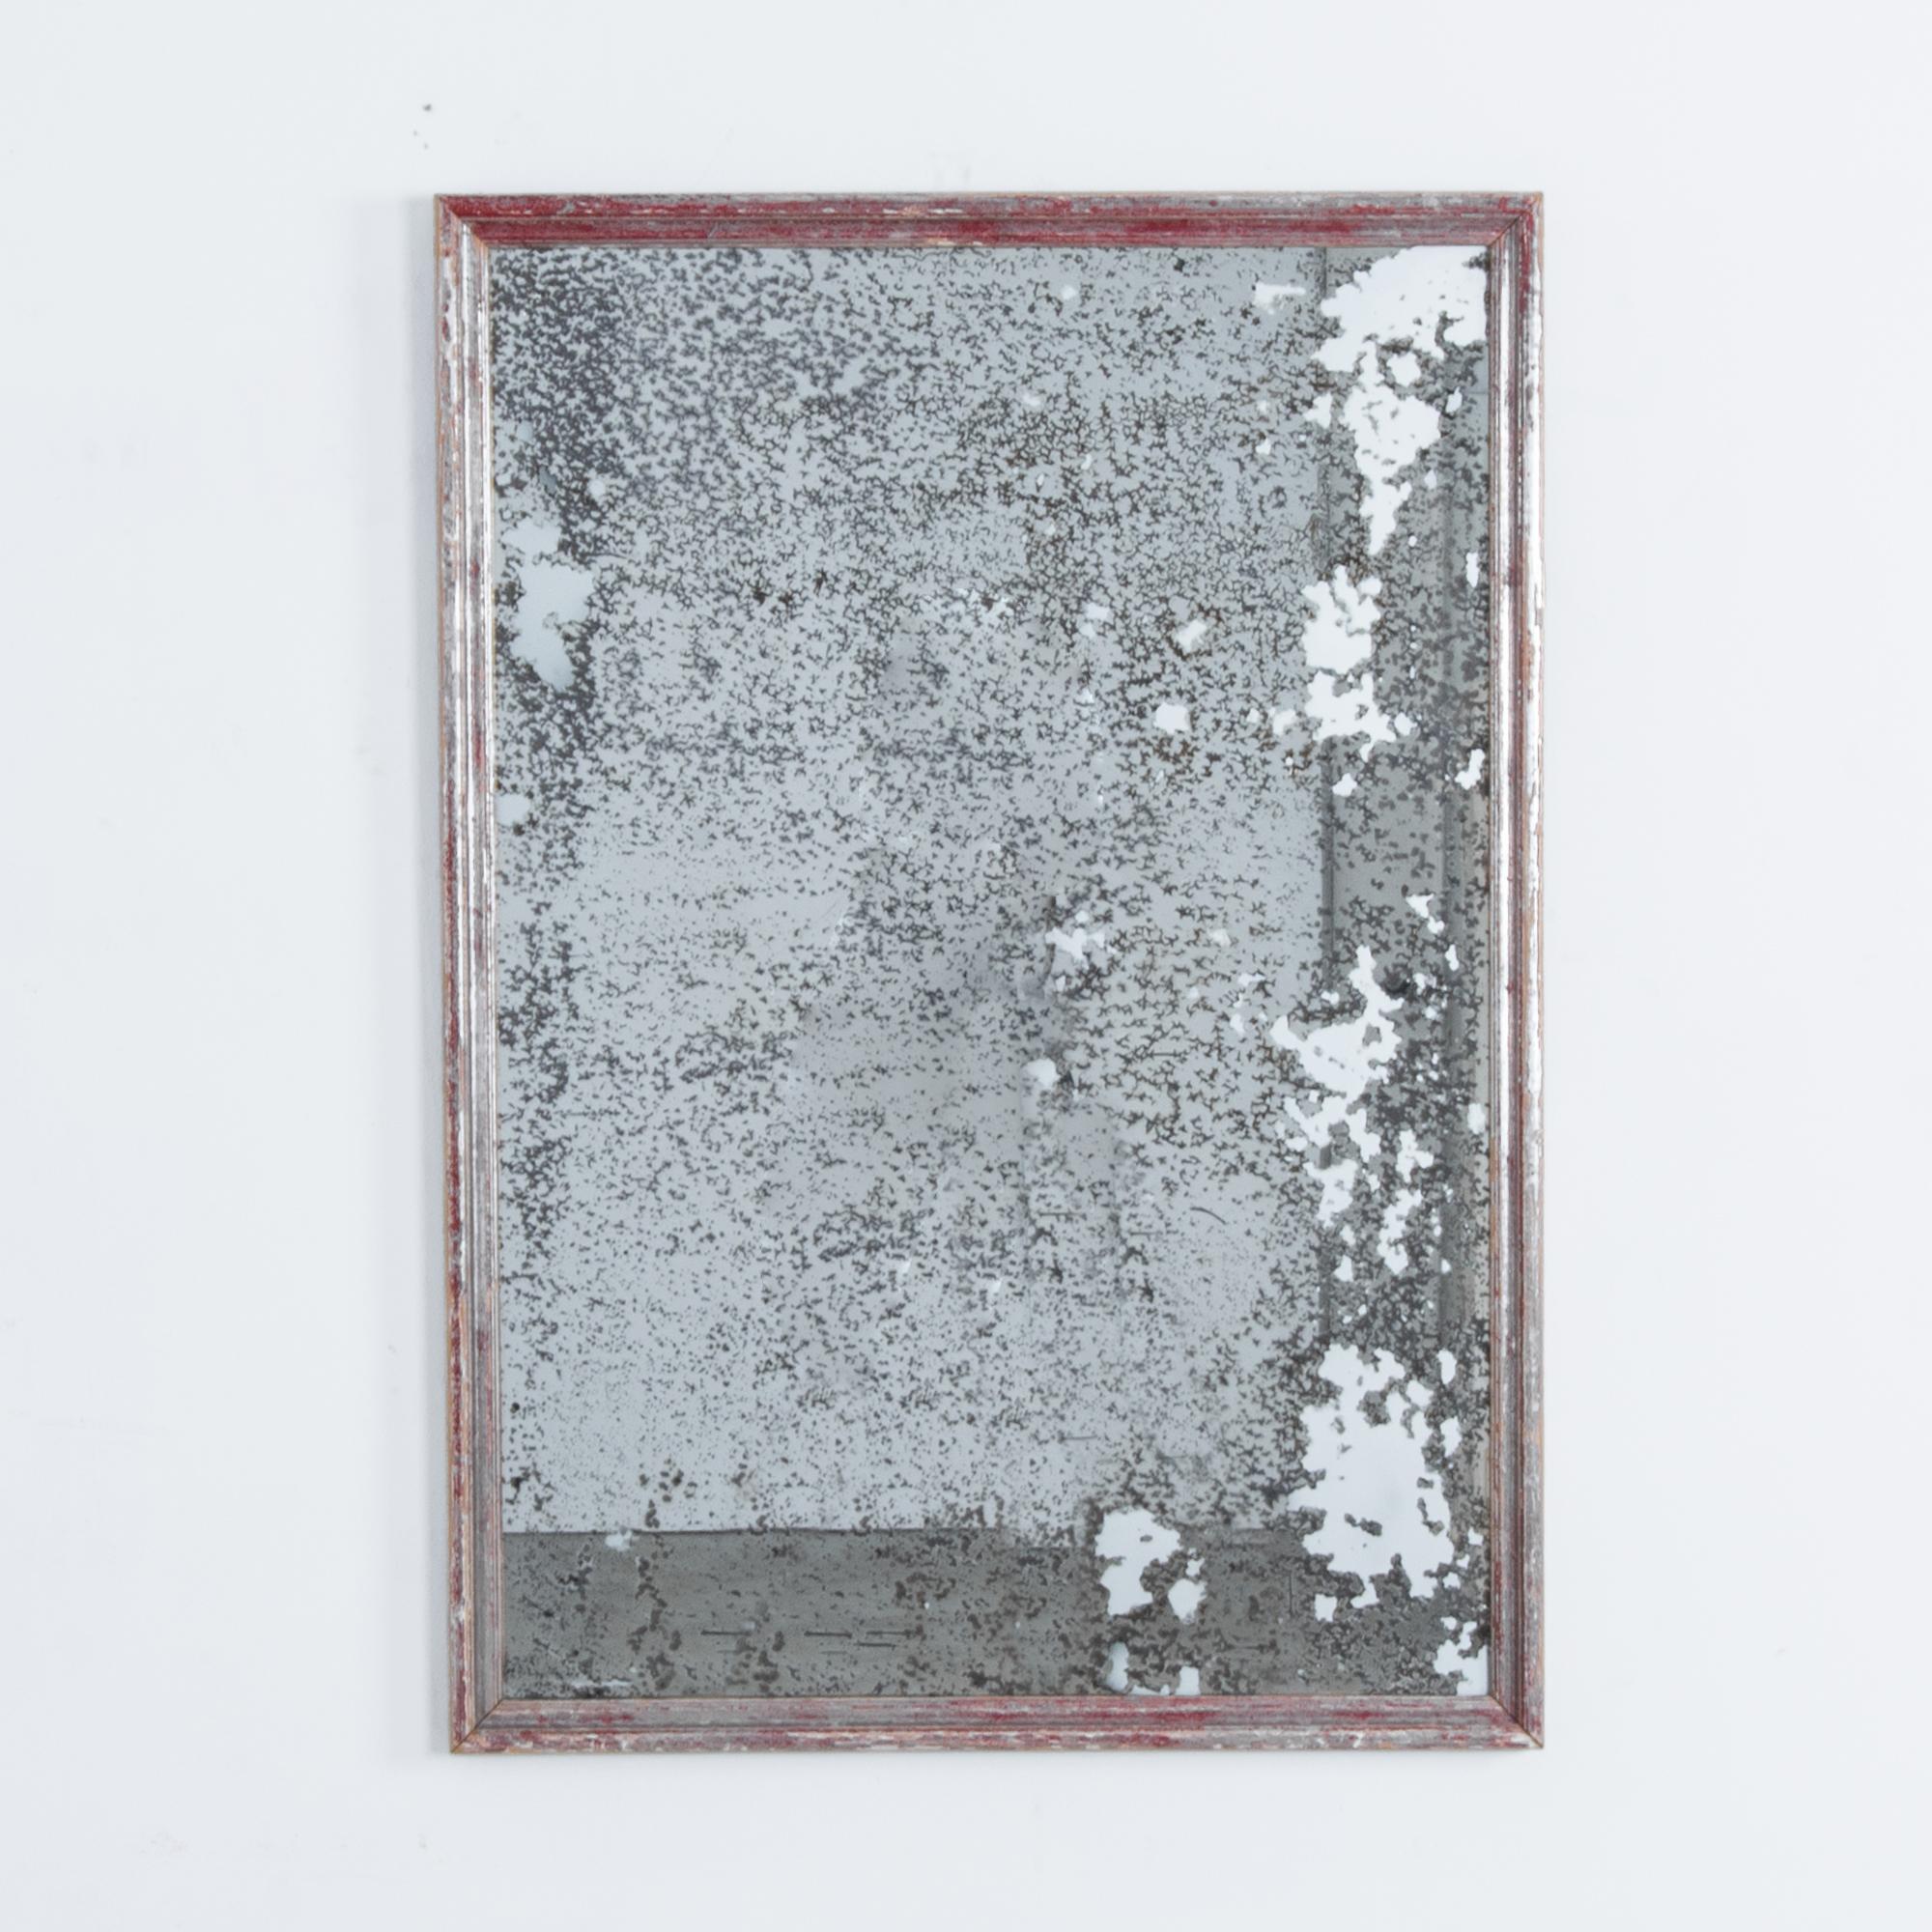 This wall mirror from France, circa 1920, has a heavy, variegated patina. Dark speckles cover the entirety of the surface of the mirror, creating a nostalgic, mysterious effect. The worn red paint of the rectangular wooden frame implies a vivid past.